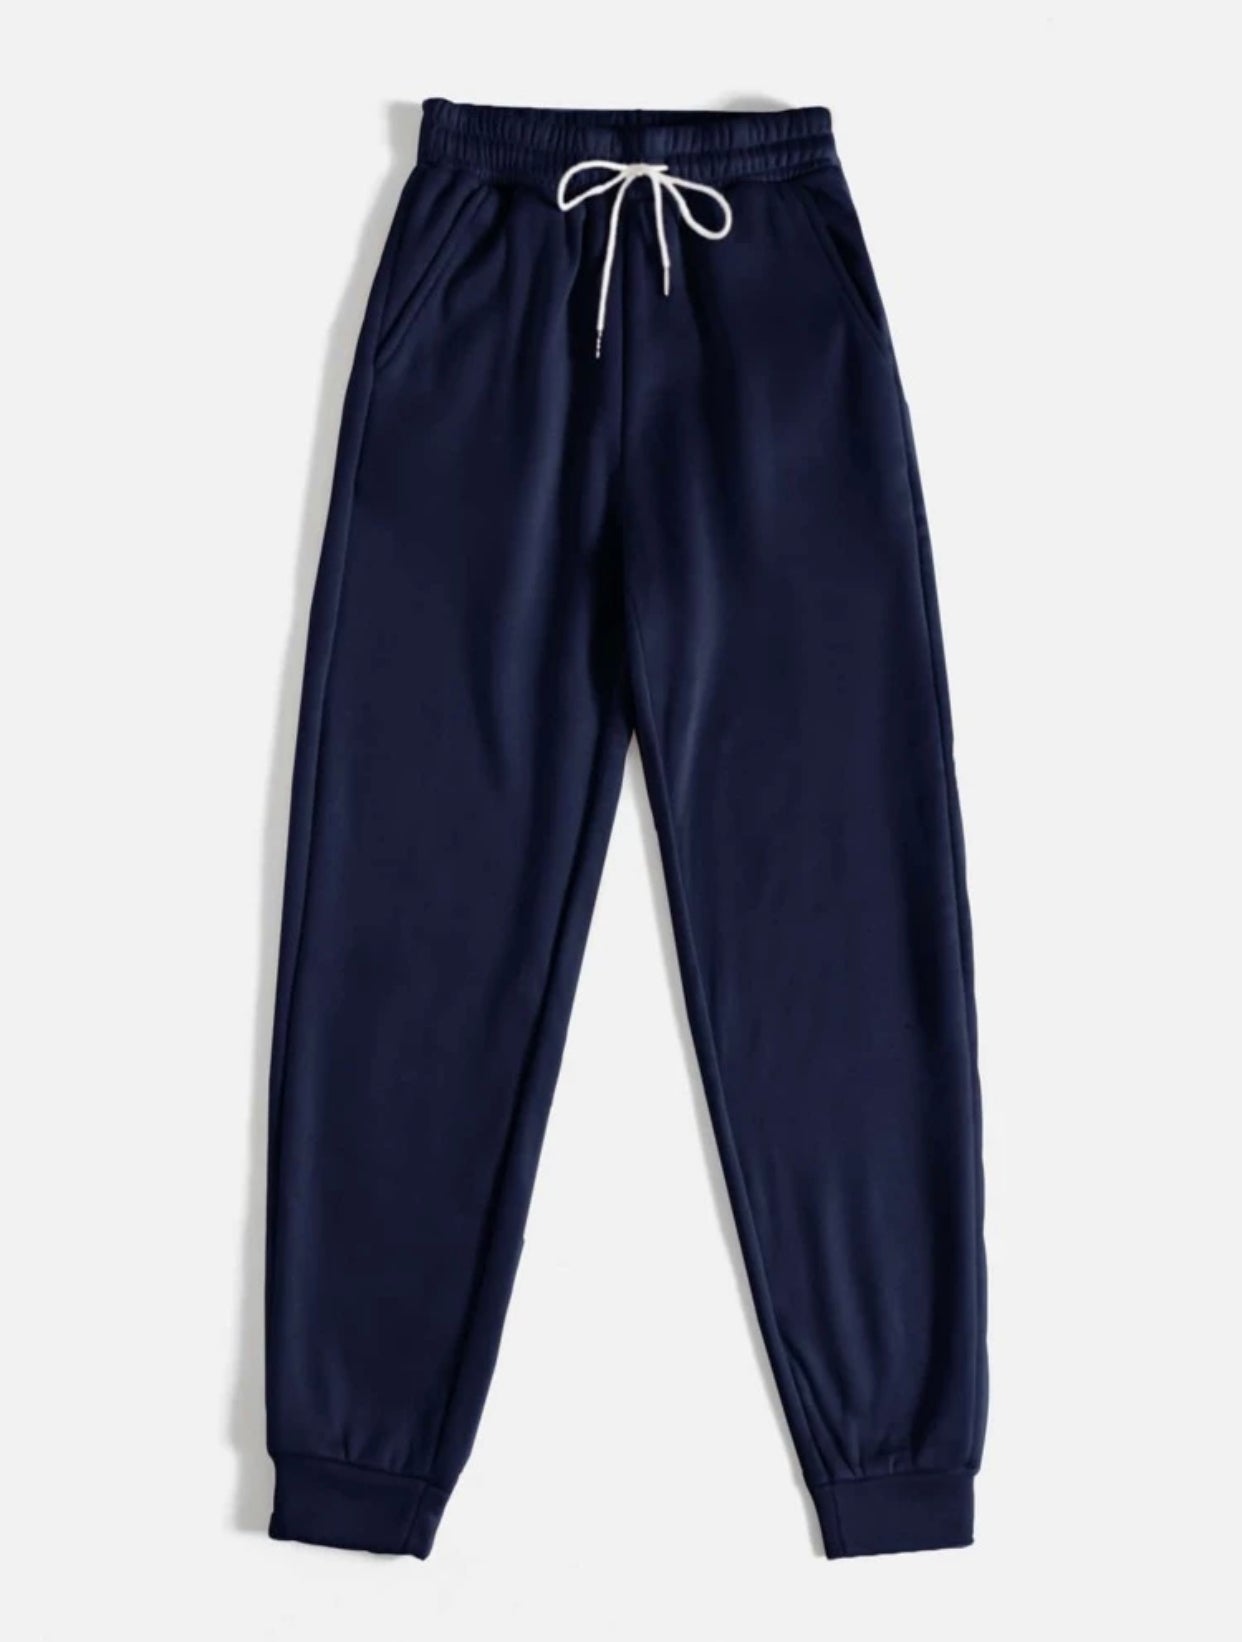 Teen Solid Navy Blue Cotton Sweatpant